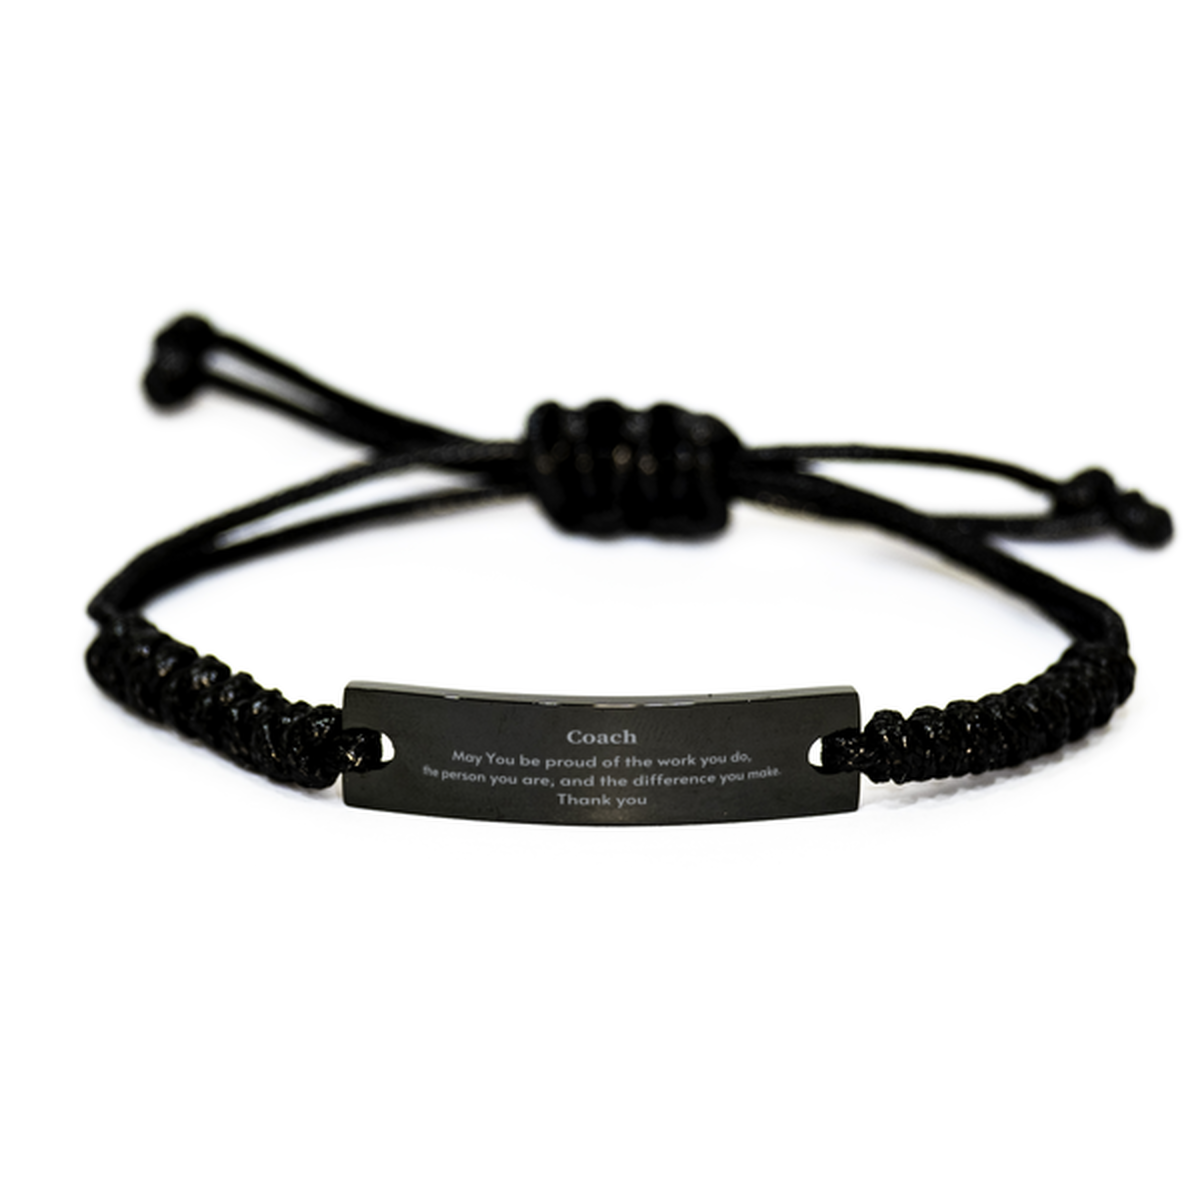 Heartwarming Black Rope Bracelet Retirement Coworkers Gifts for Coach, Coach May You be proud of the work you do, the person you are Gifts for Boss Men Women Friends